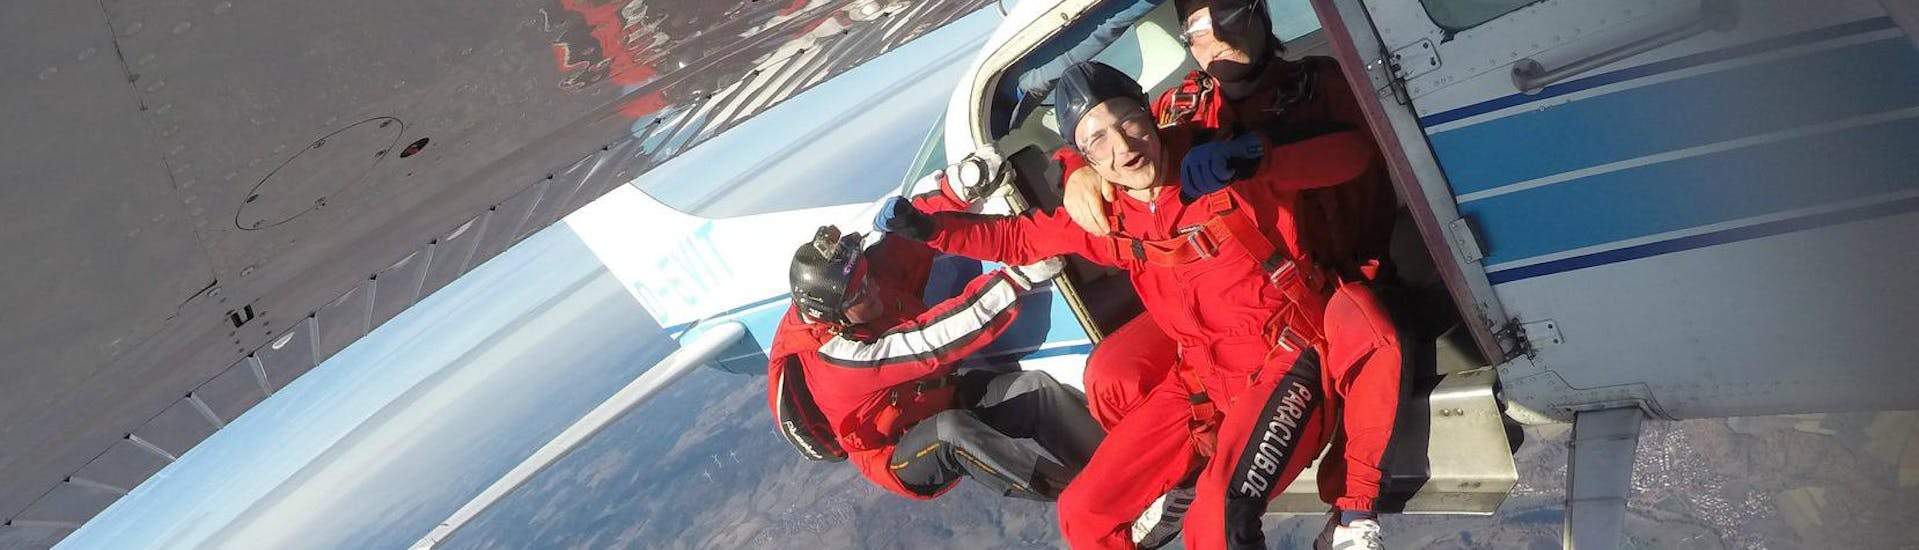 Tandem Skydive from 4000m - Incl. Photos &amp; Video with Blue Sky Adventures Schwäbisch Hall - Hero image